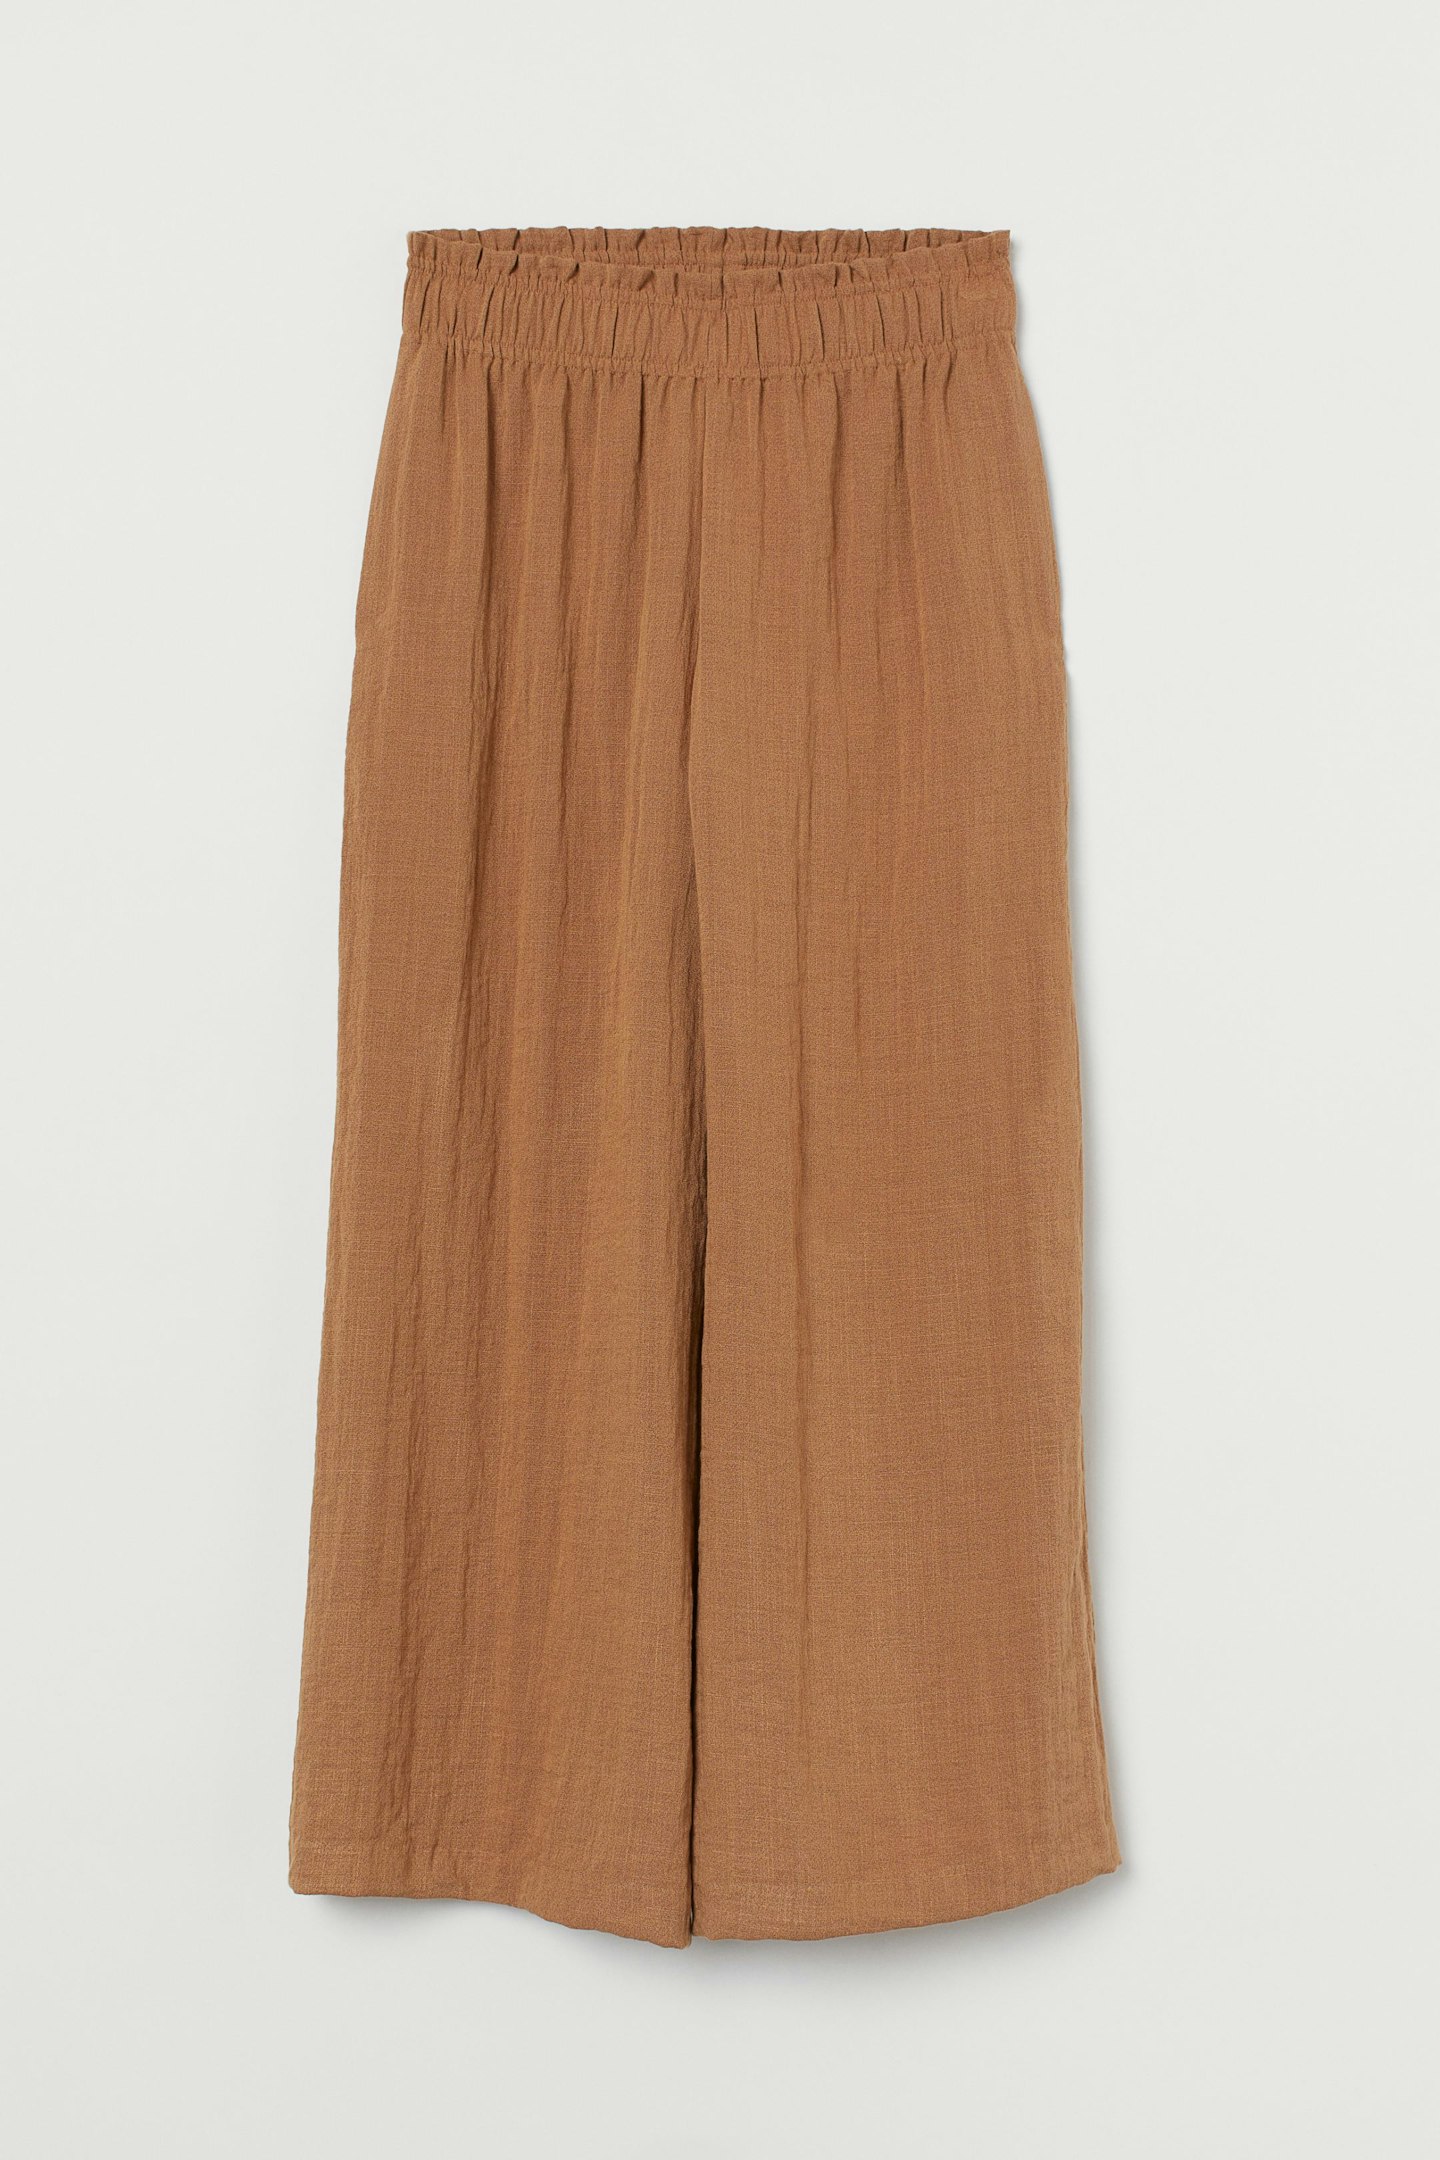 H&M, Wide Trousers, £19.99